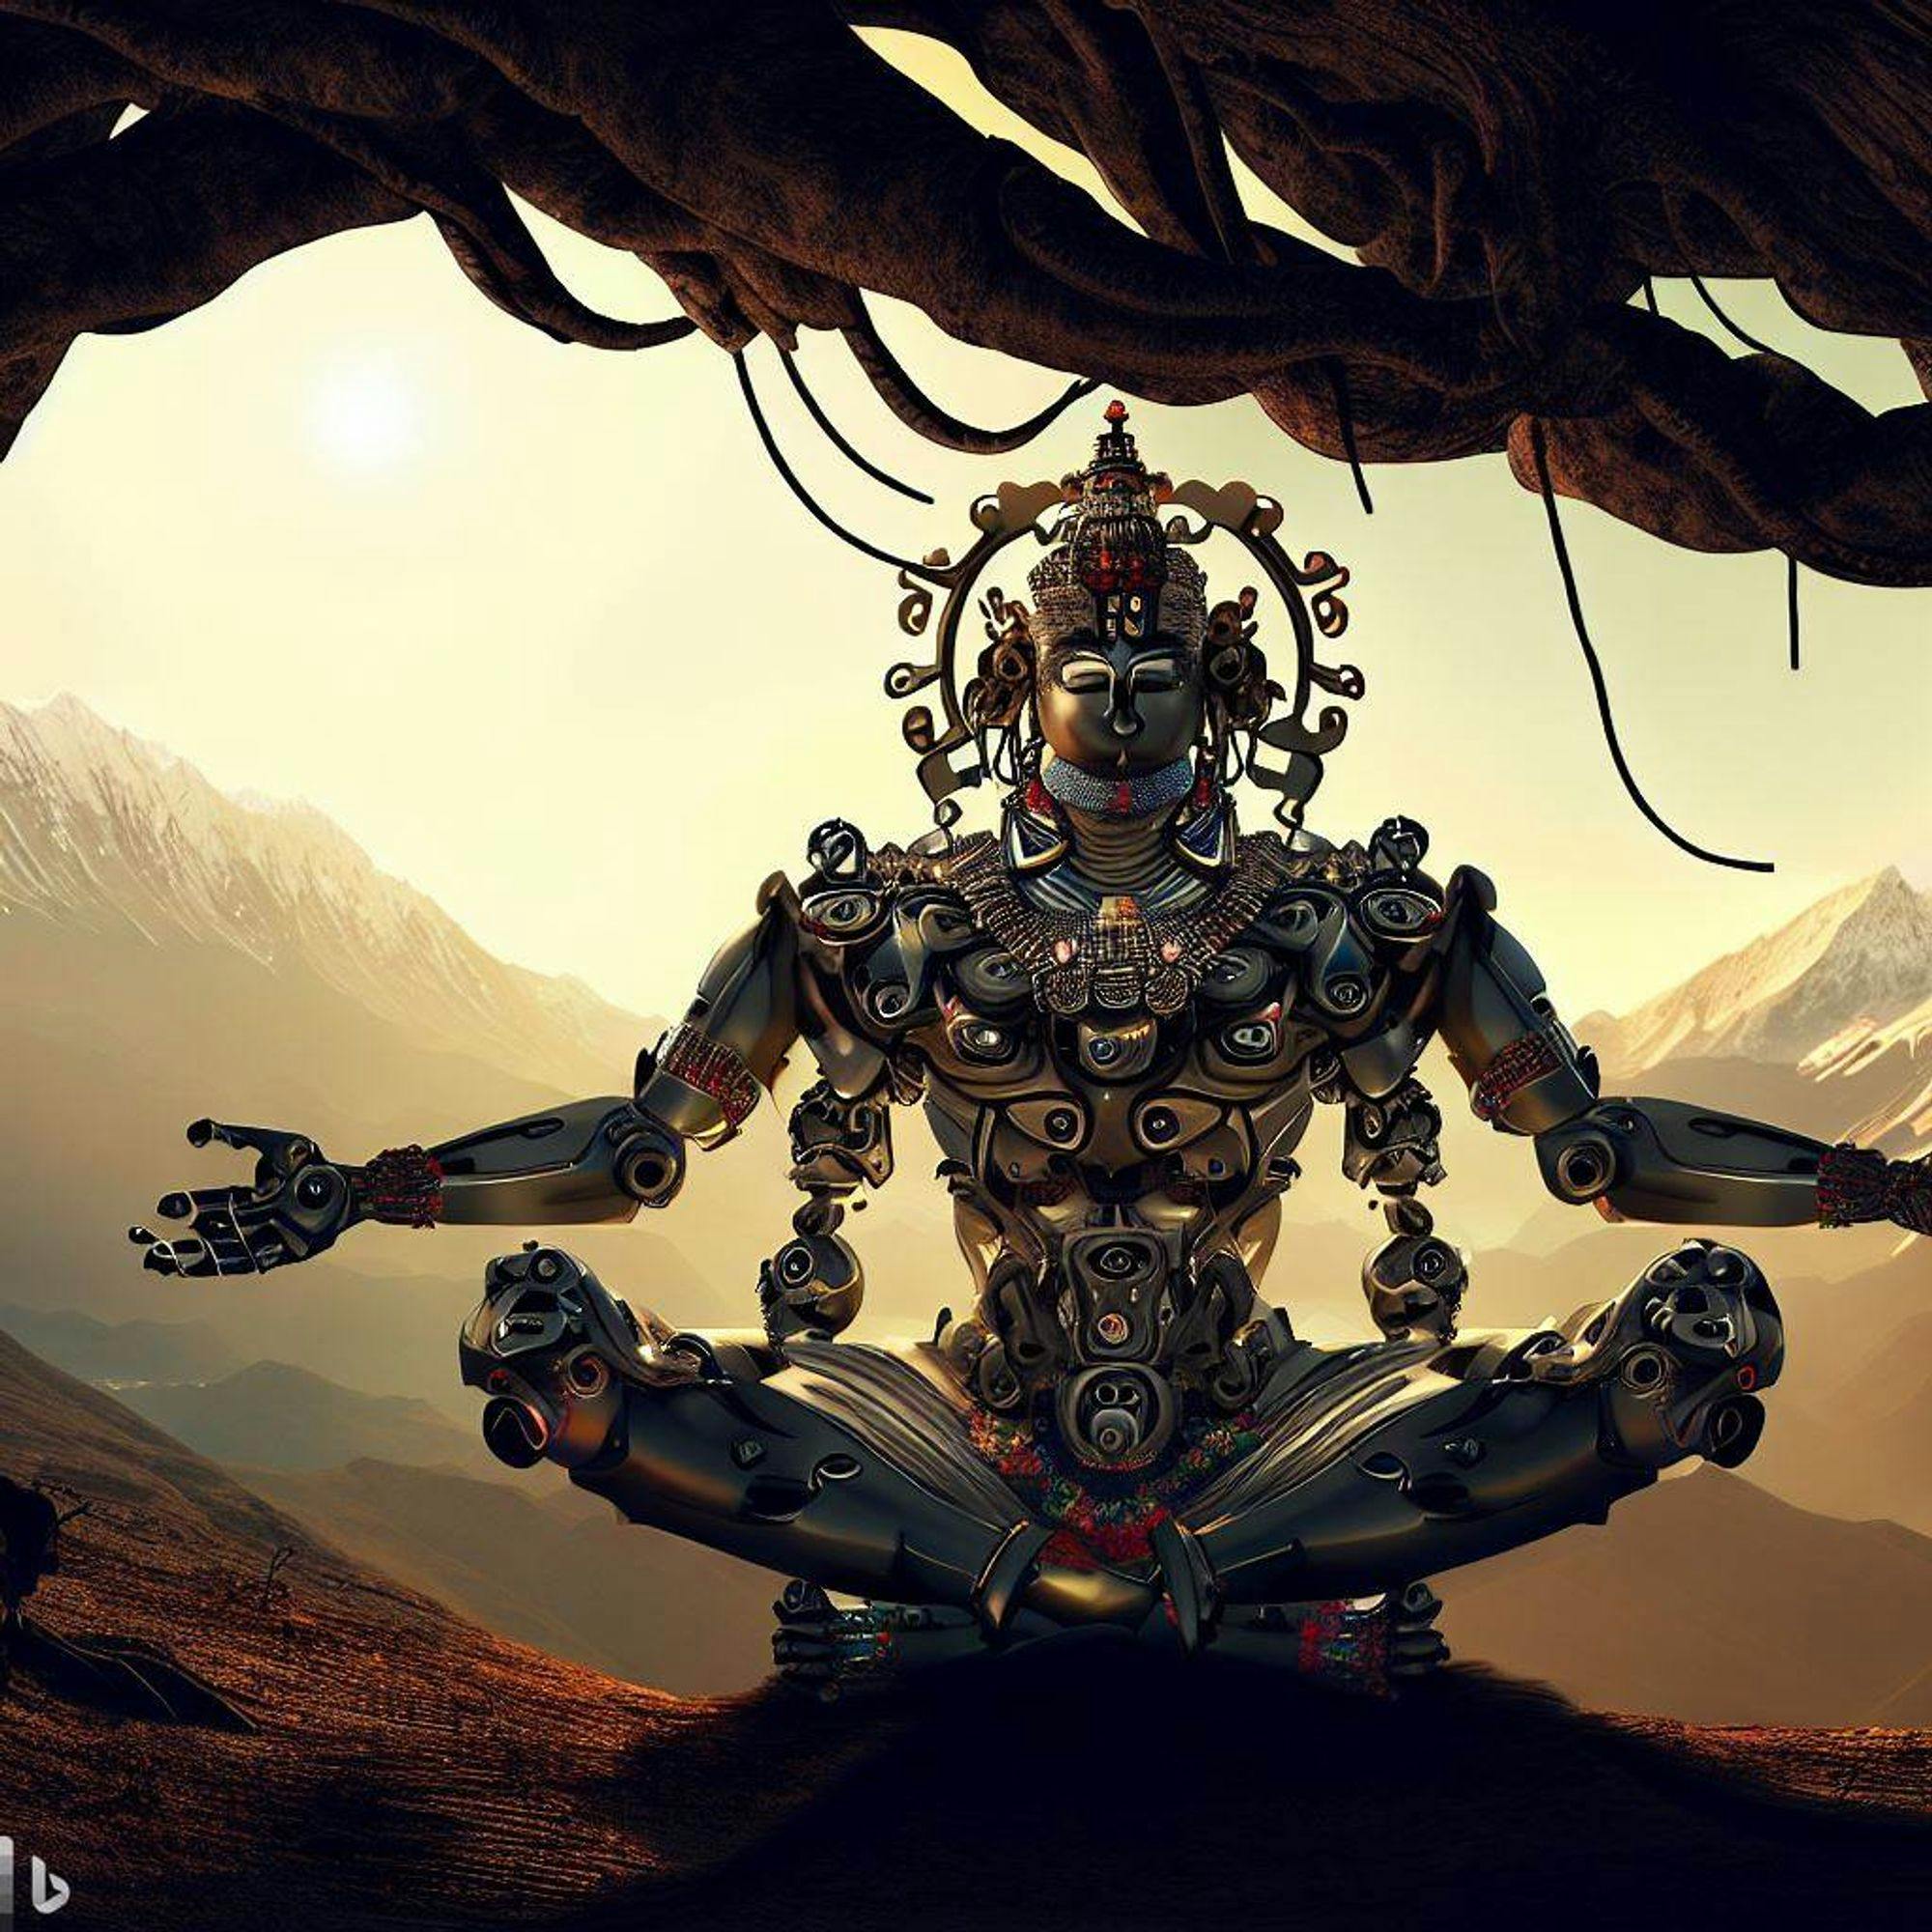 DALL-E: The Hindu god Vishnu, in his avatar as a cyborg, sits in a lotus position underneath a sprawling tree. His mechanical body is intricately adorned with traditional jewelry and garments, as if to honor his divine origins. The cybernetic components of his form hum with a quiet energy, lending an otherworldly air to the scene. As Vishnu meditates, his surroundings shimmer in the heat of the sun. Majestic mountains loom in the distance, their peaks jagged and snow-capped.